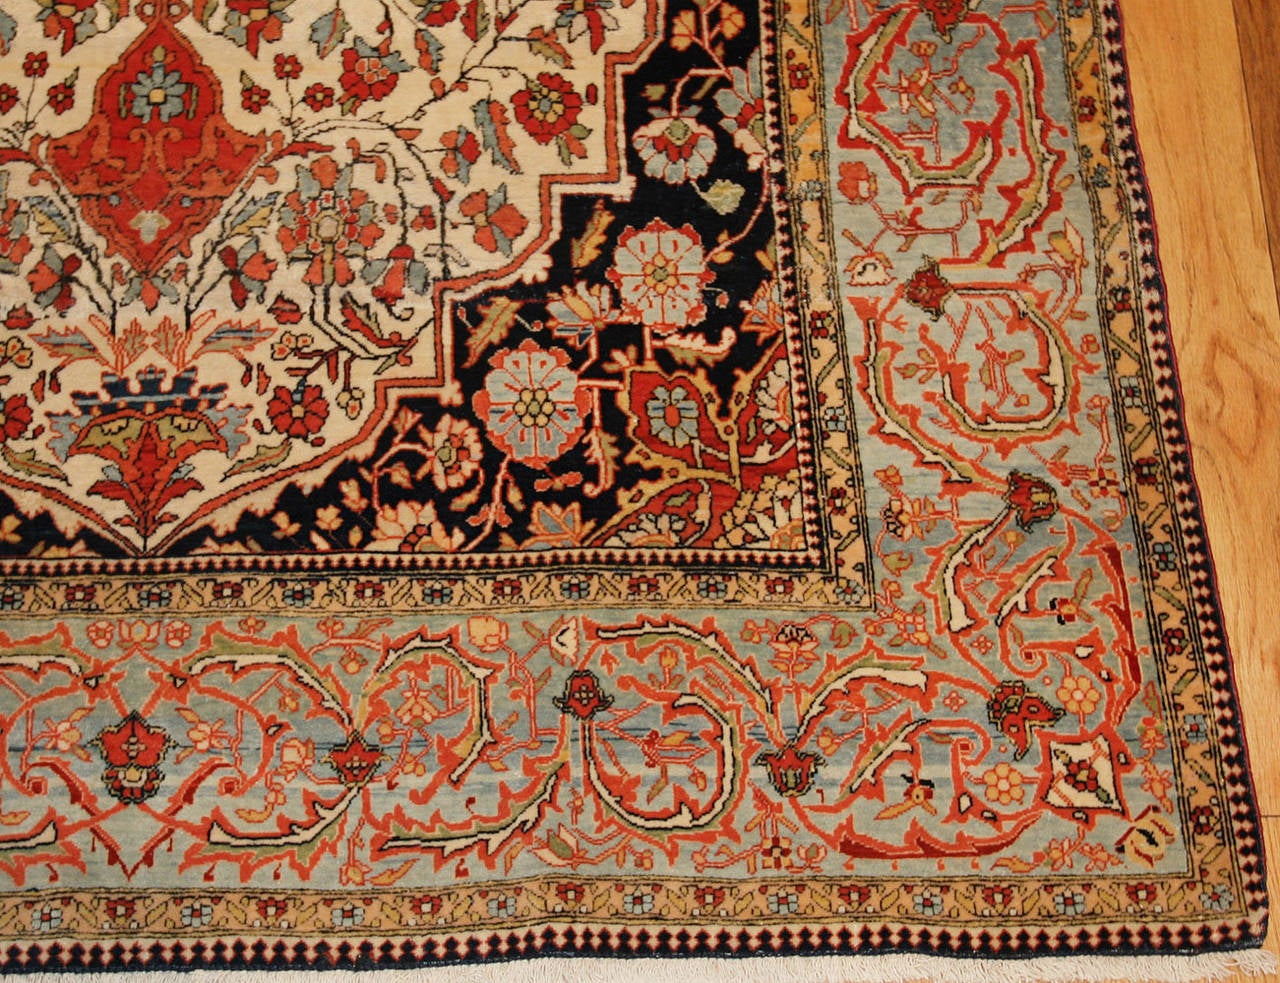 Kashan rug, Persia, last quarter of the 19th century, crafted in Kashan, this extraordinary antique Persian carpet is an ideal decorator's piece or collector's item that represents the hallmarks of the acclaimed Mohtashem designation. These